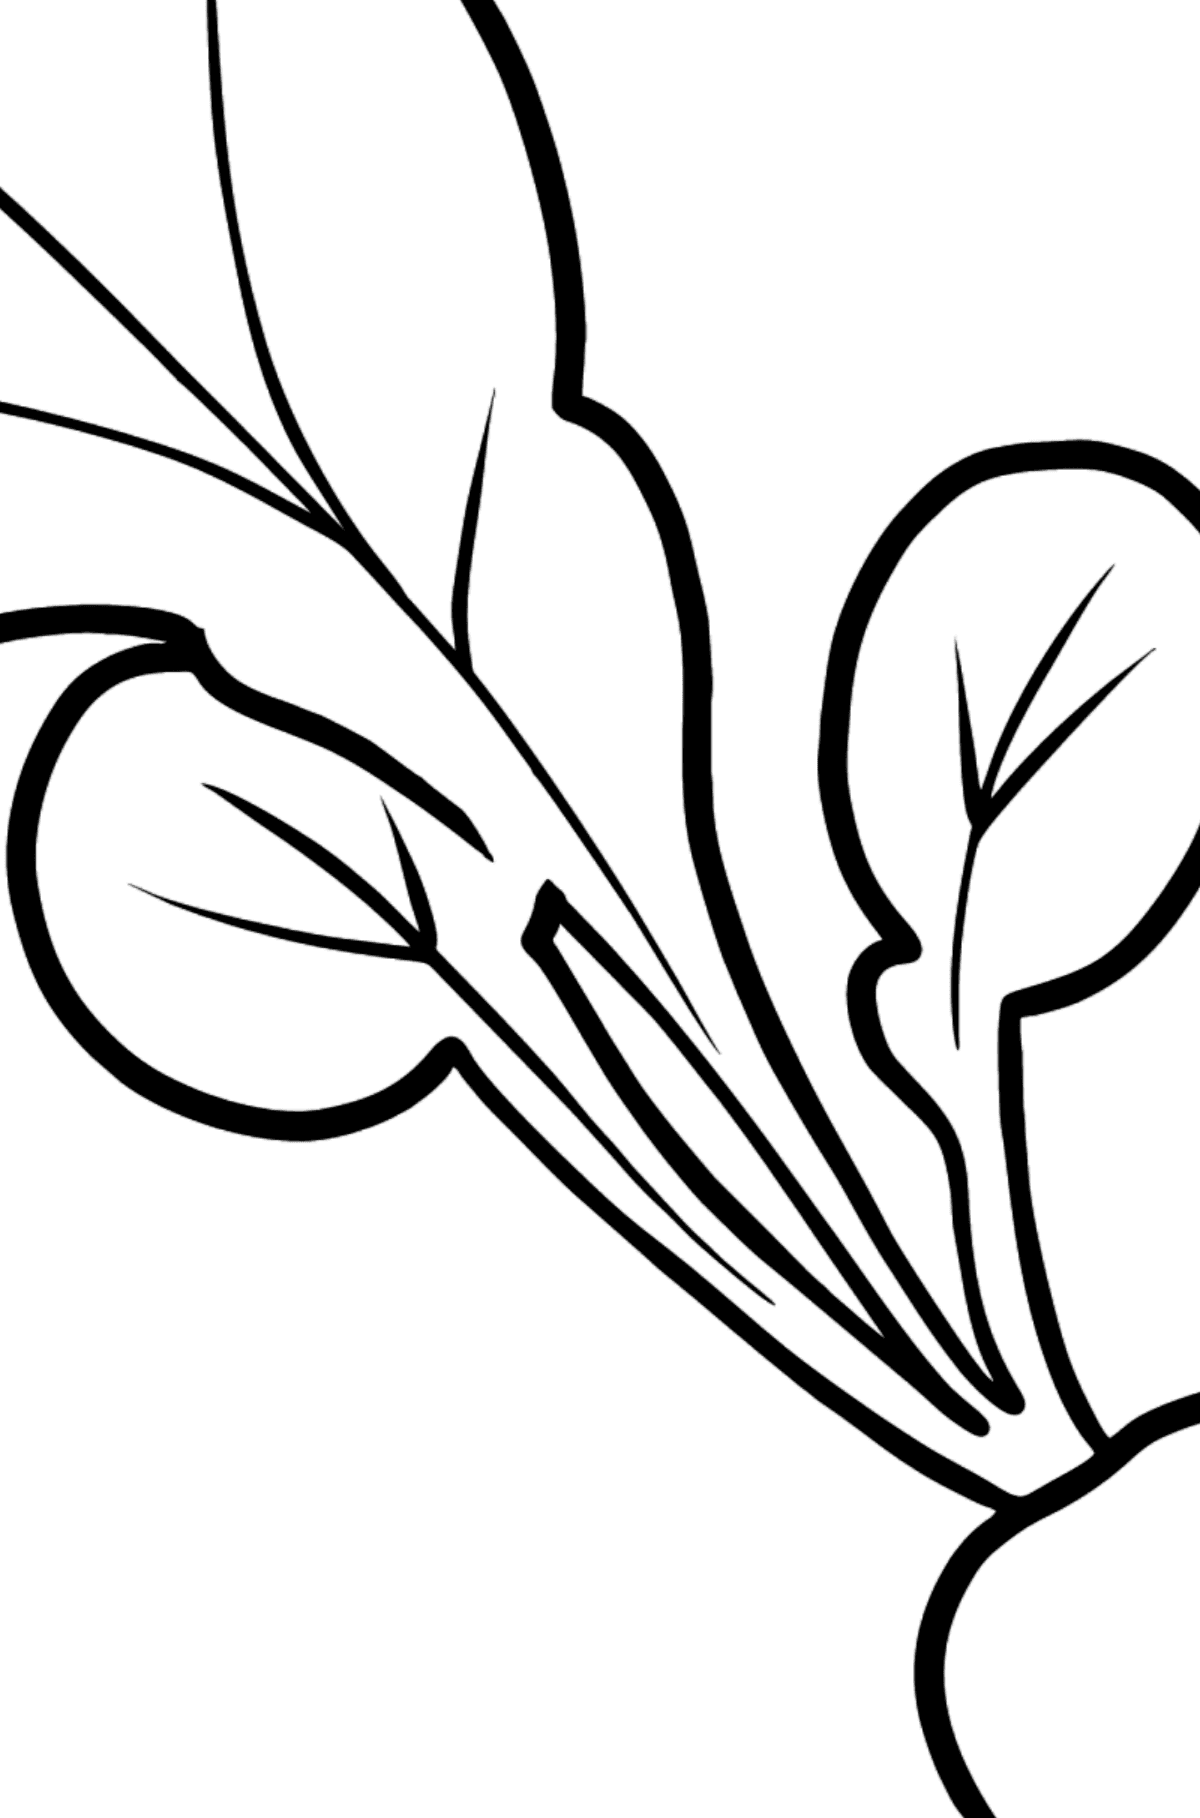 Radish coloring page - Coloring by Numbers for Kids